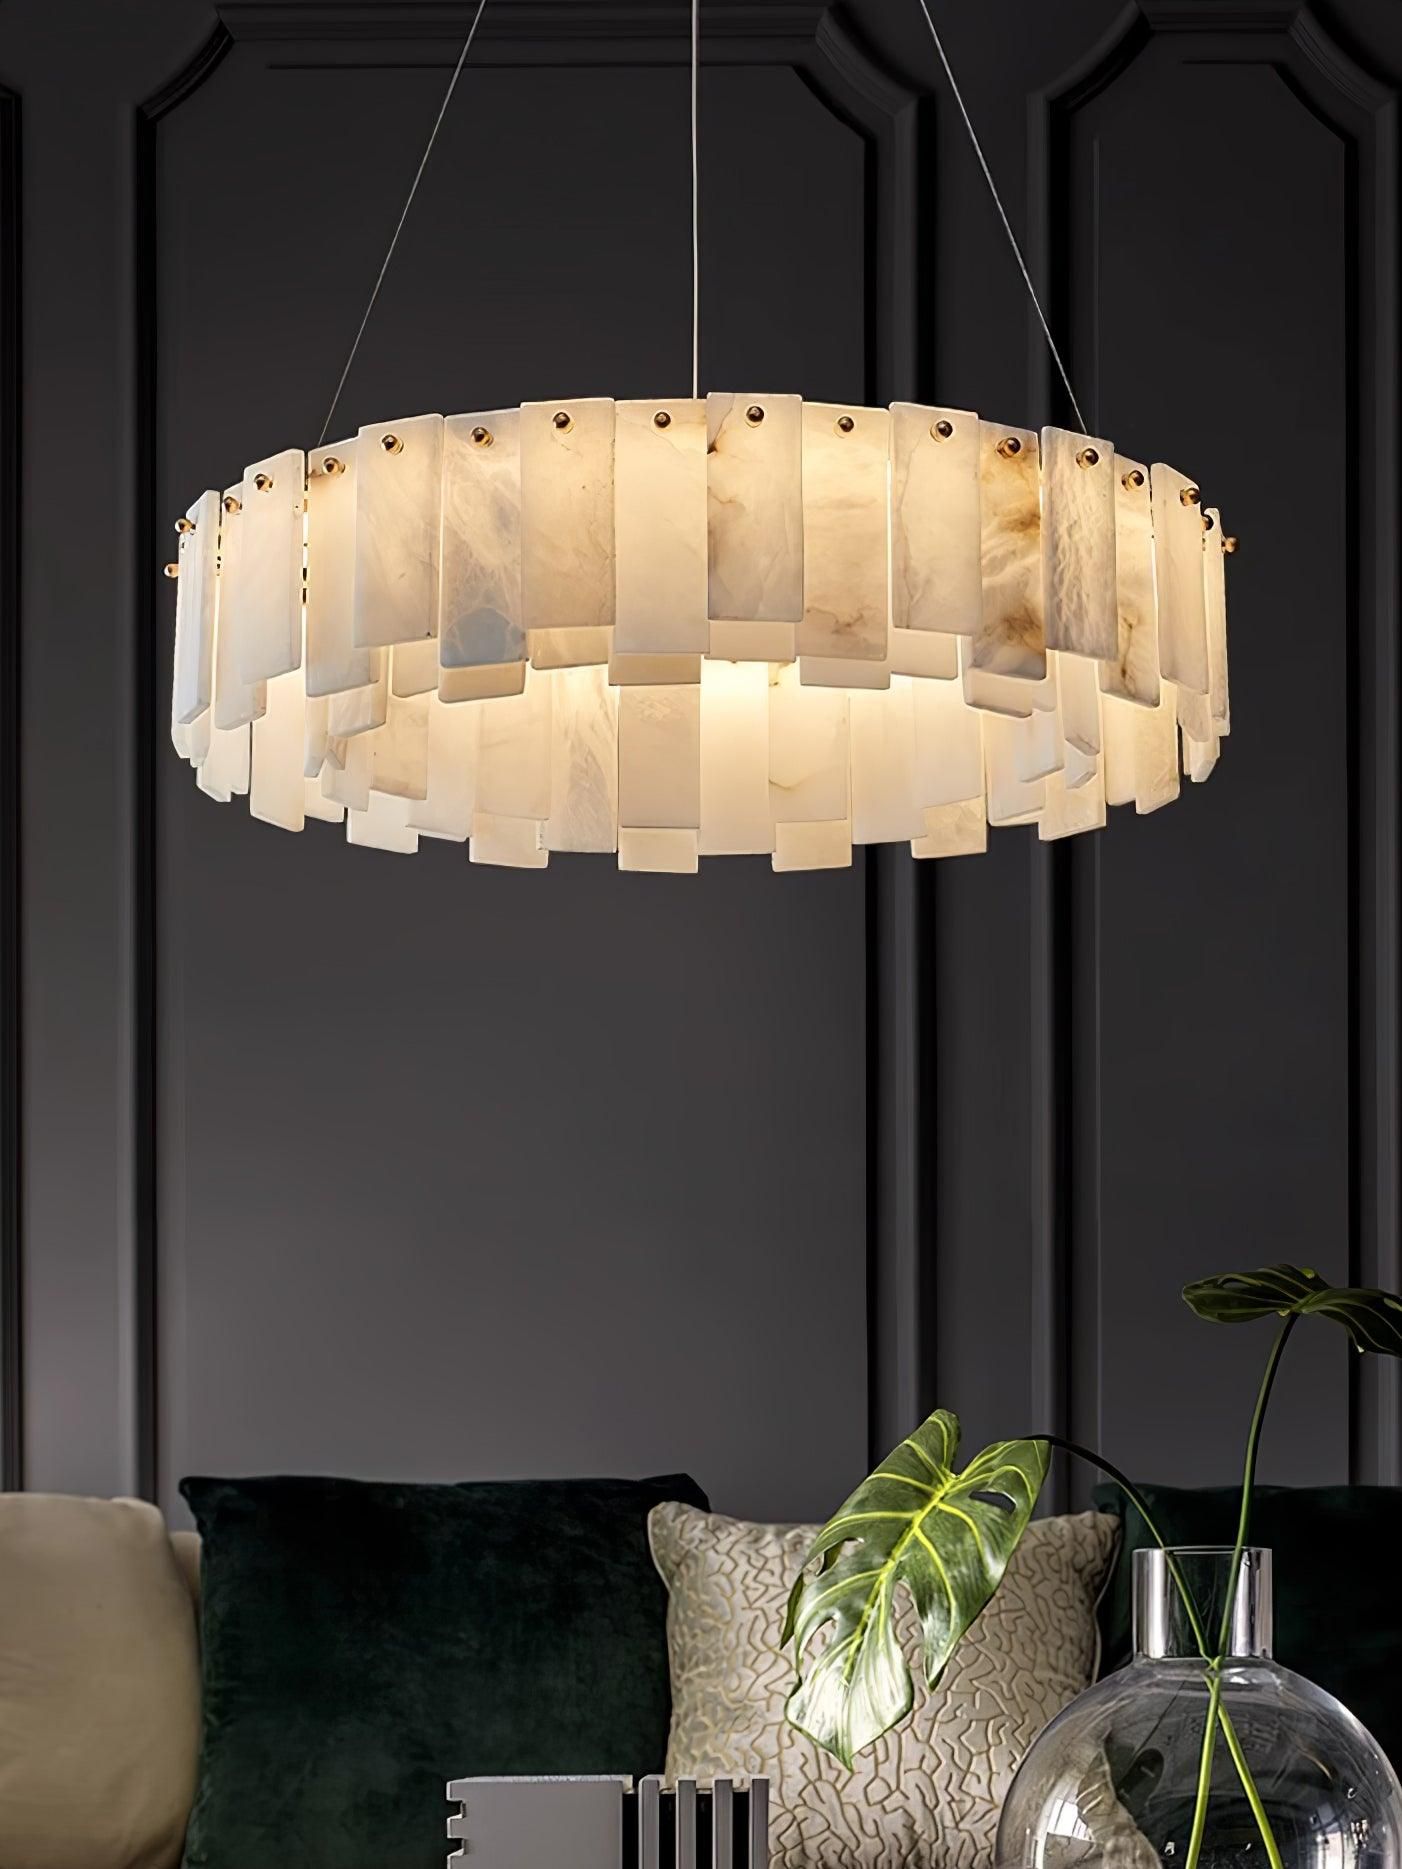 Contemporary Chandeliers Modern Lighting Fixtures for Elegant Home Decor